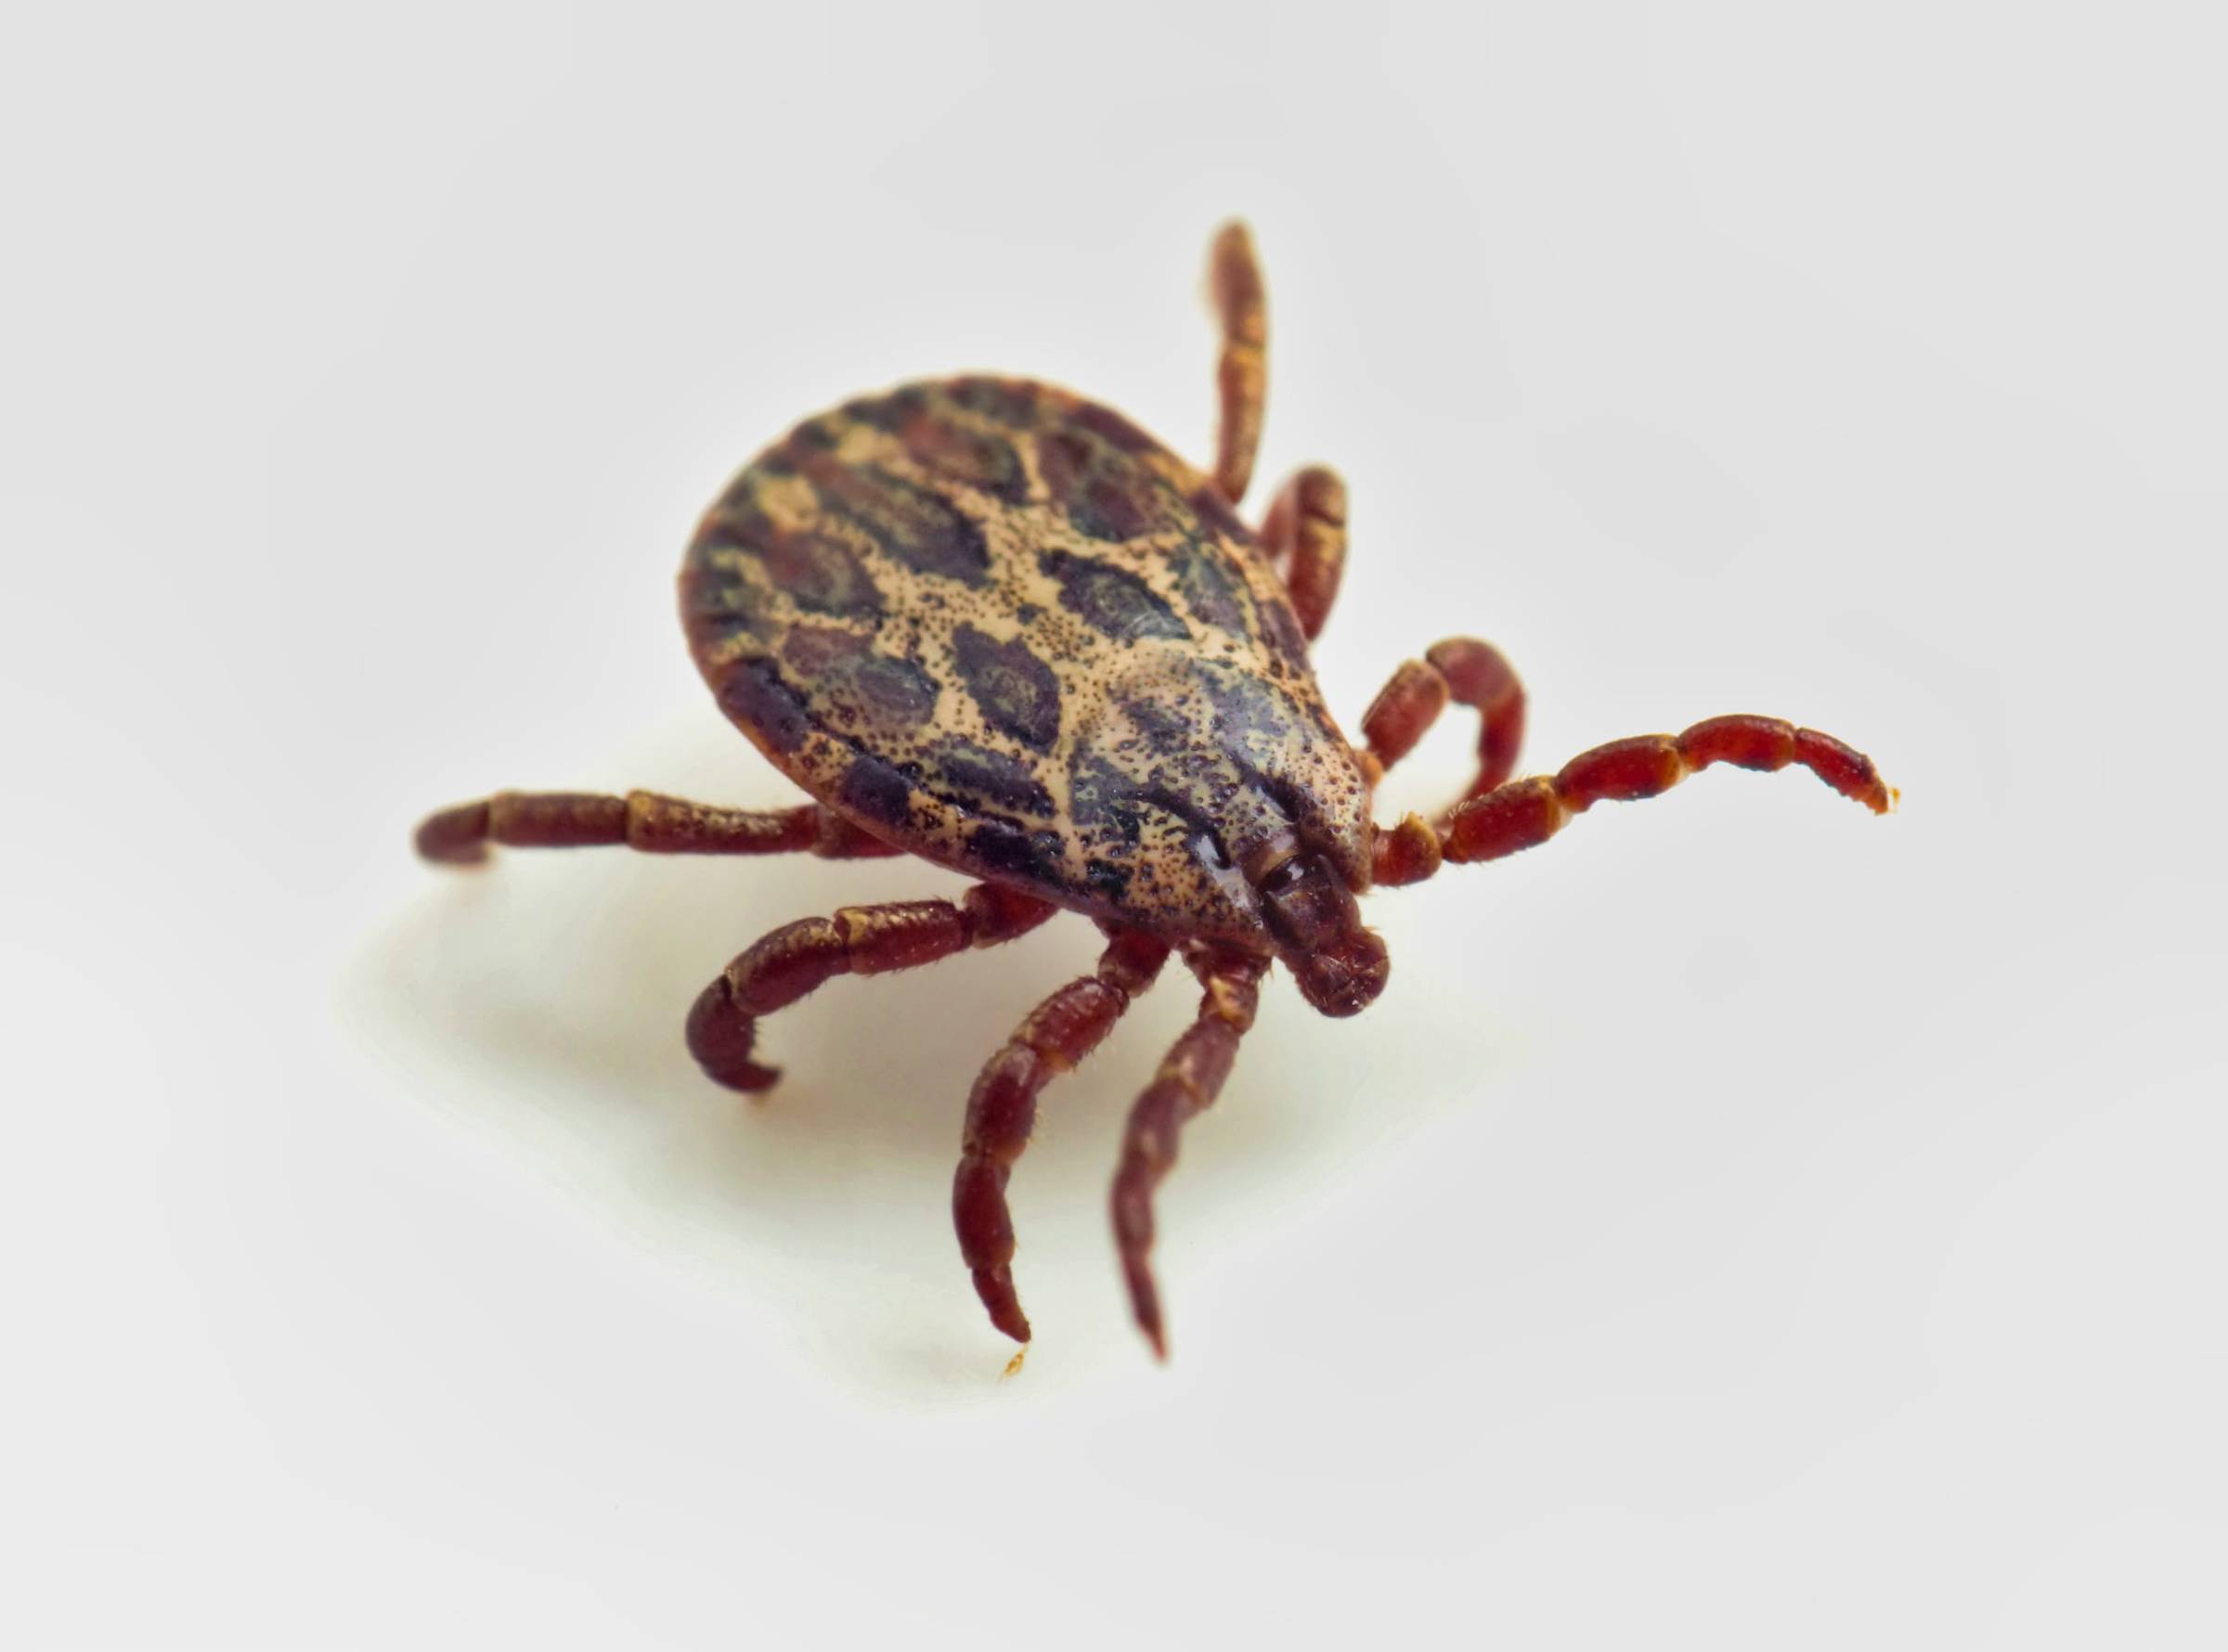 Tick Control & Removal in NYC